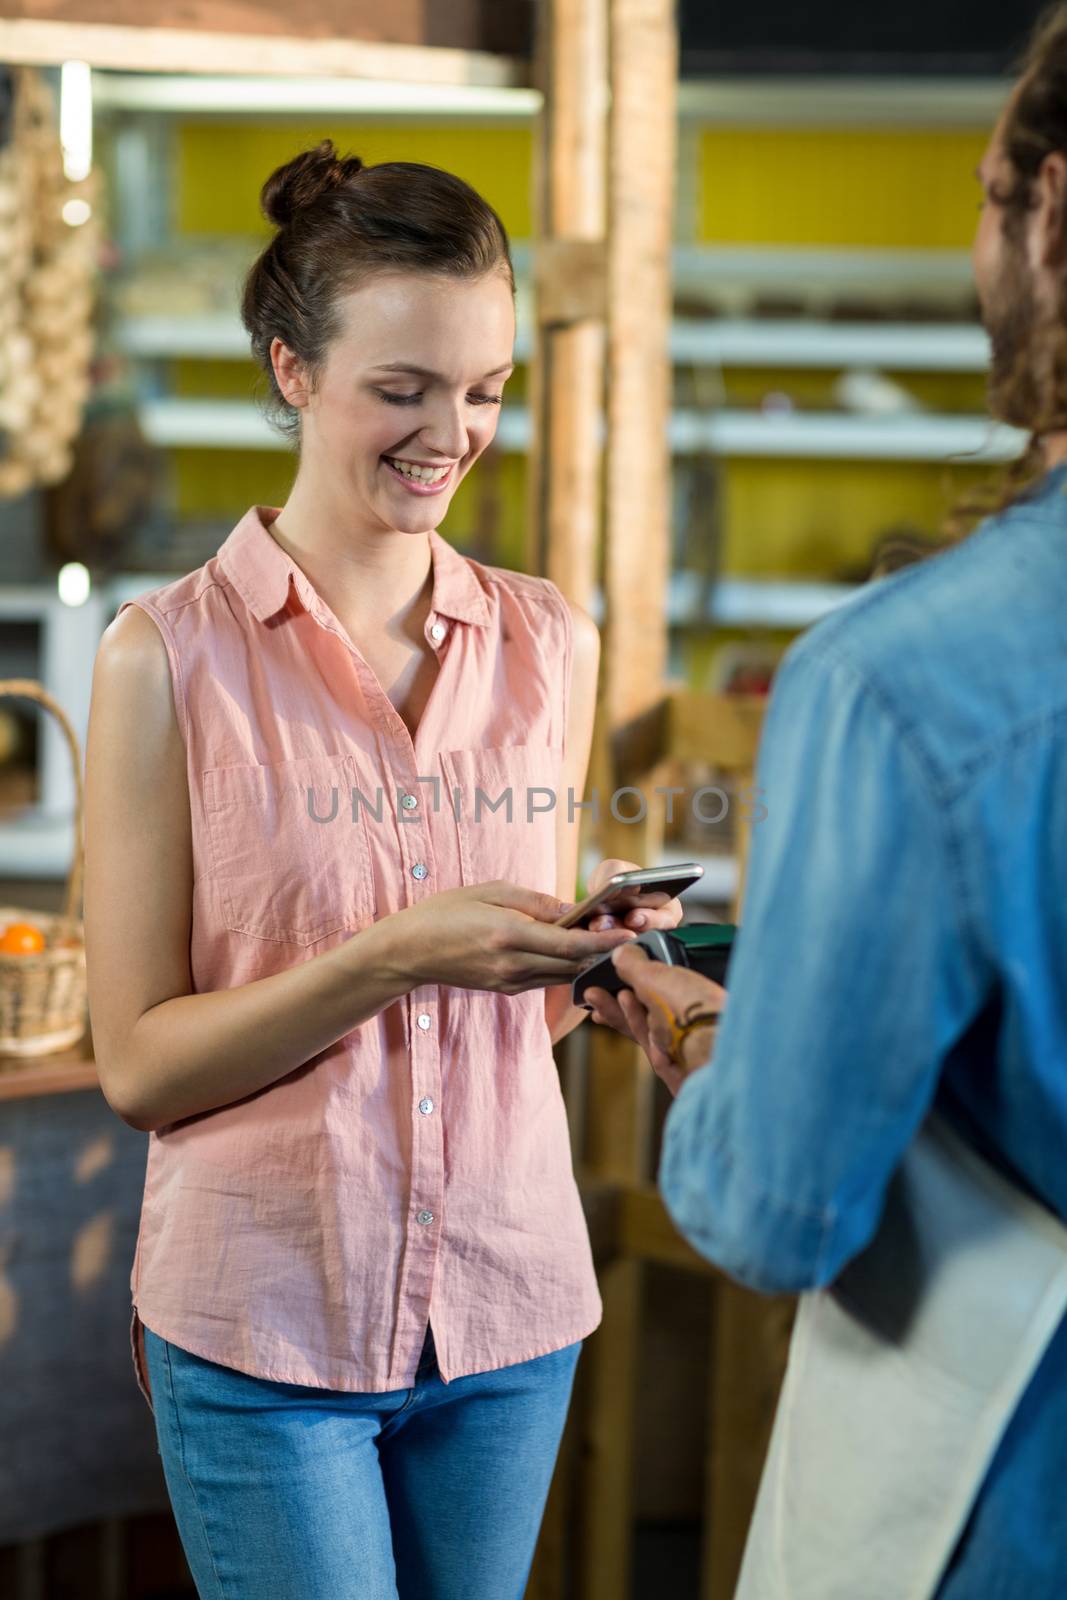 Woman making a payment by using NFC technology by Wavebreakmedia